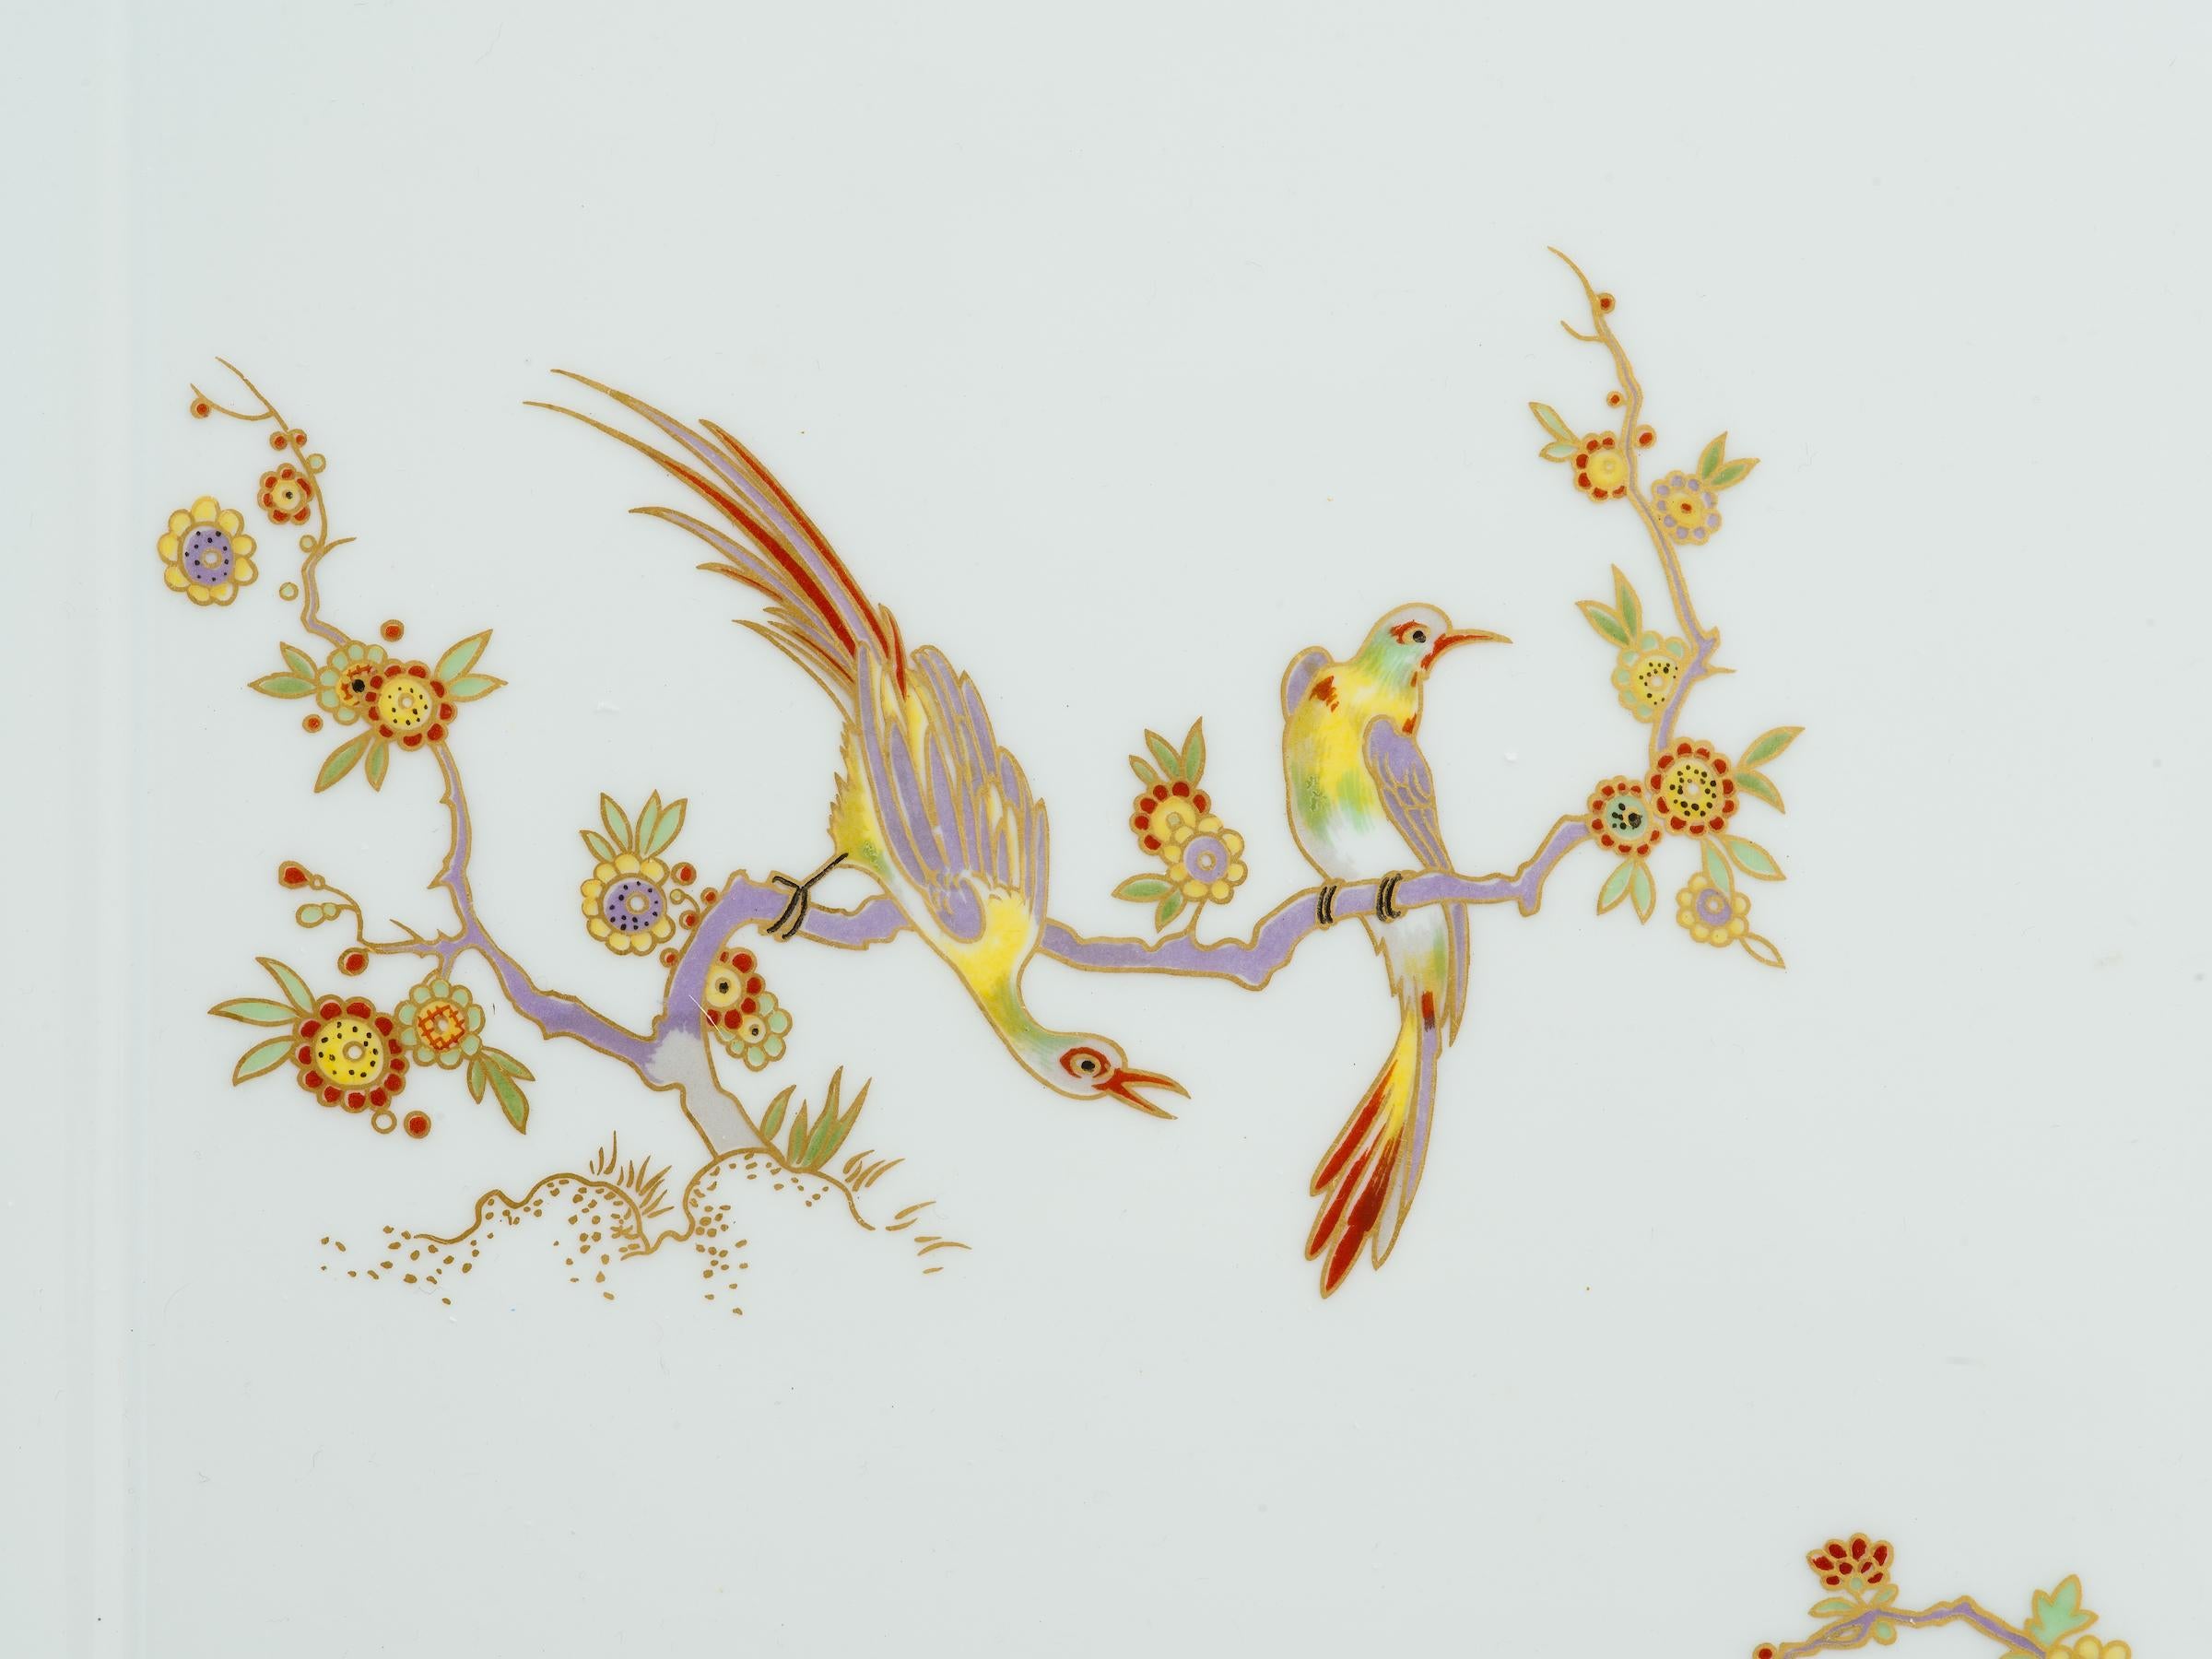 Richard Ginori porcelain serving tray with birds in tress and floral motifs, and gilt decorated handles. Signed on bottom. Italy, circa 1960s.